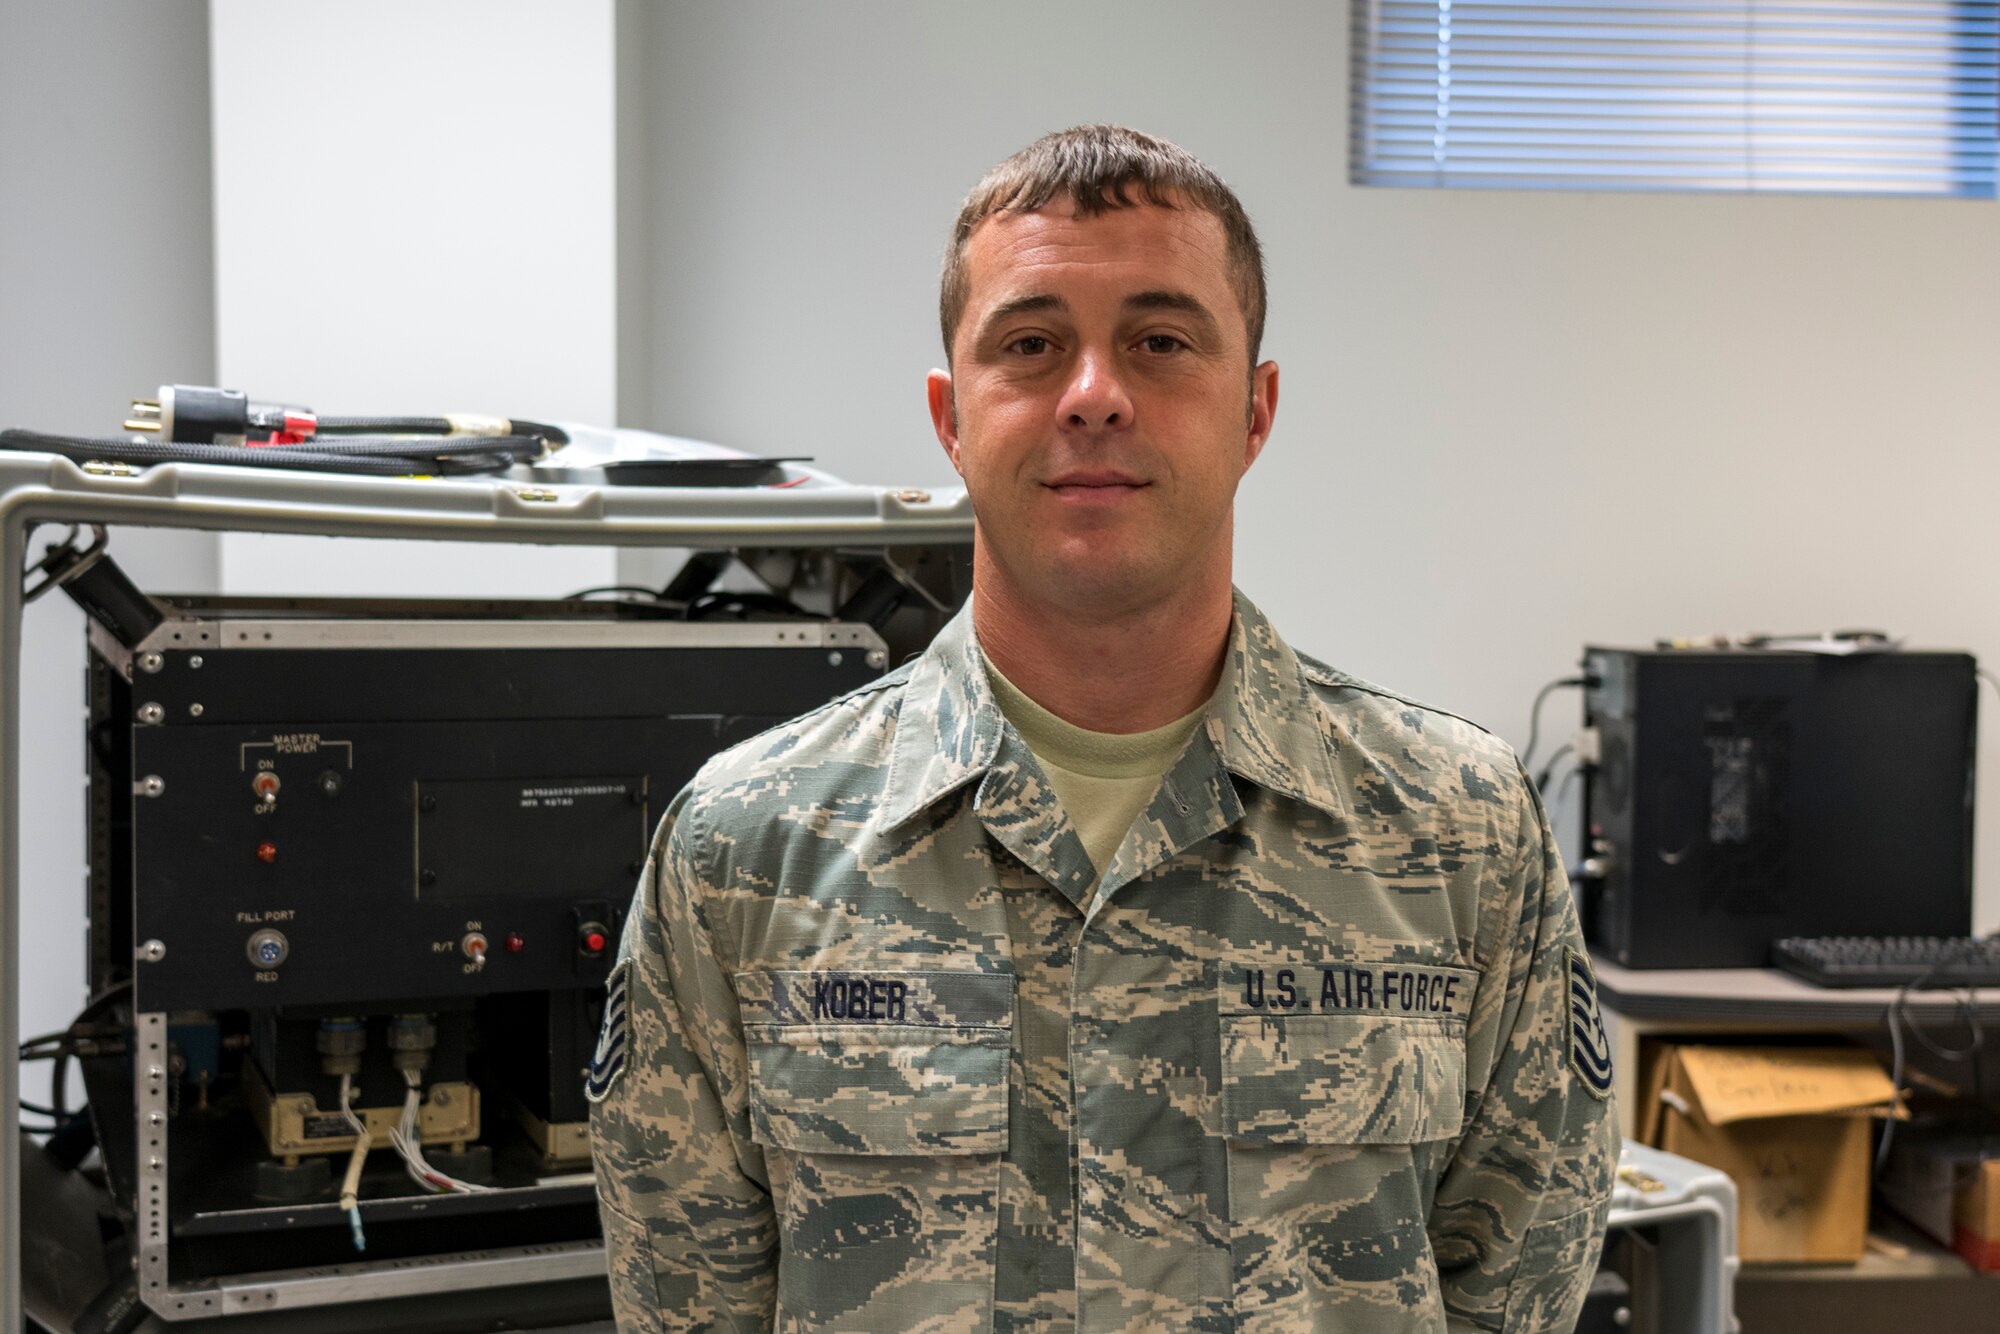 Tech. Sgt. Russell Kober, 403rd Maintenance Squadron meteorology equipment technician, poses for a photo, Aug. 26, 2019 at Keesler Air Force Base, Mississippi. Kober was selected as the 403rd Wing’s second quarter award winner in the noncommissioned officer category. (U.S. Air Force photo by Tech. Sgt. Christopher Carranza)